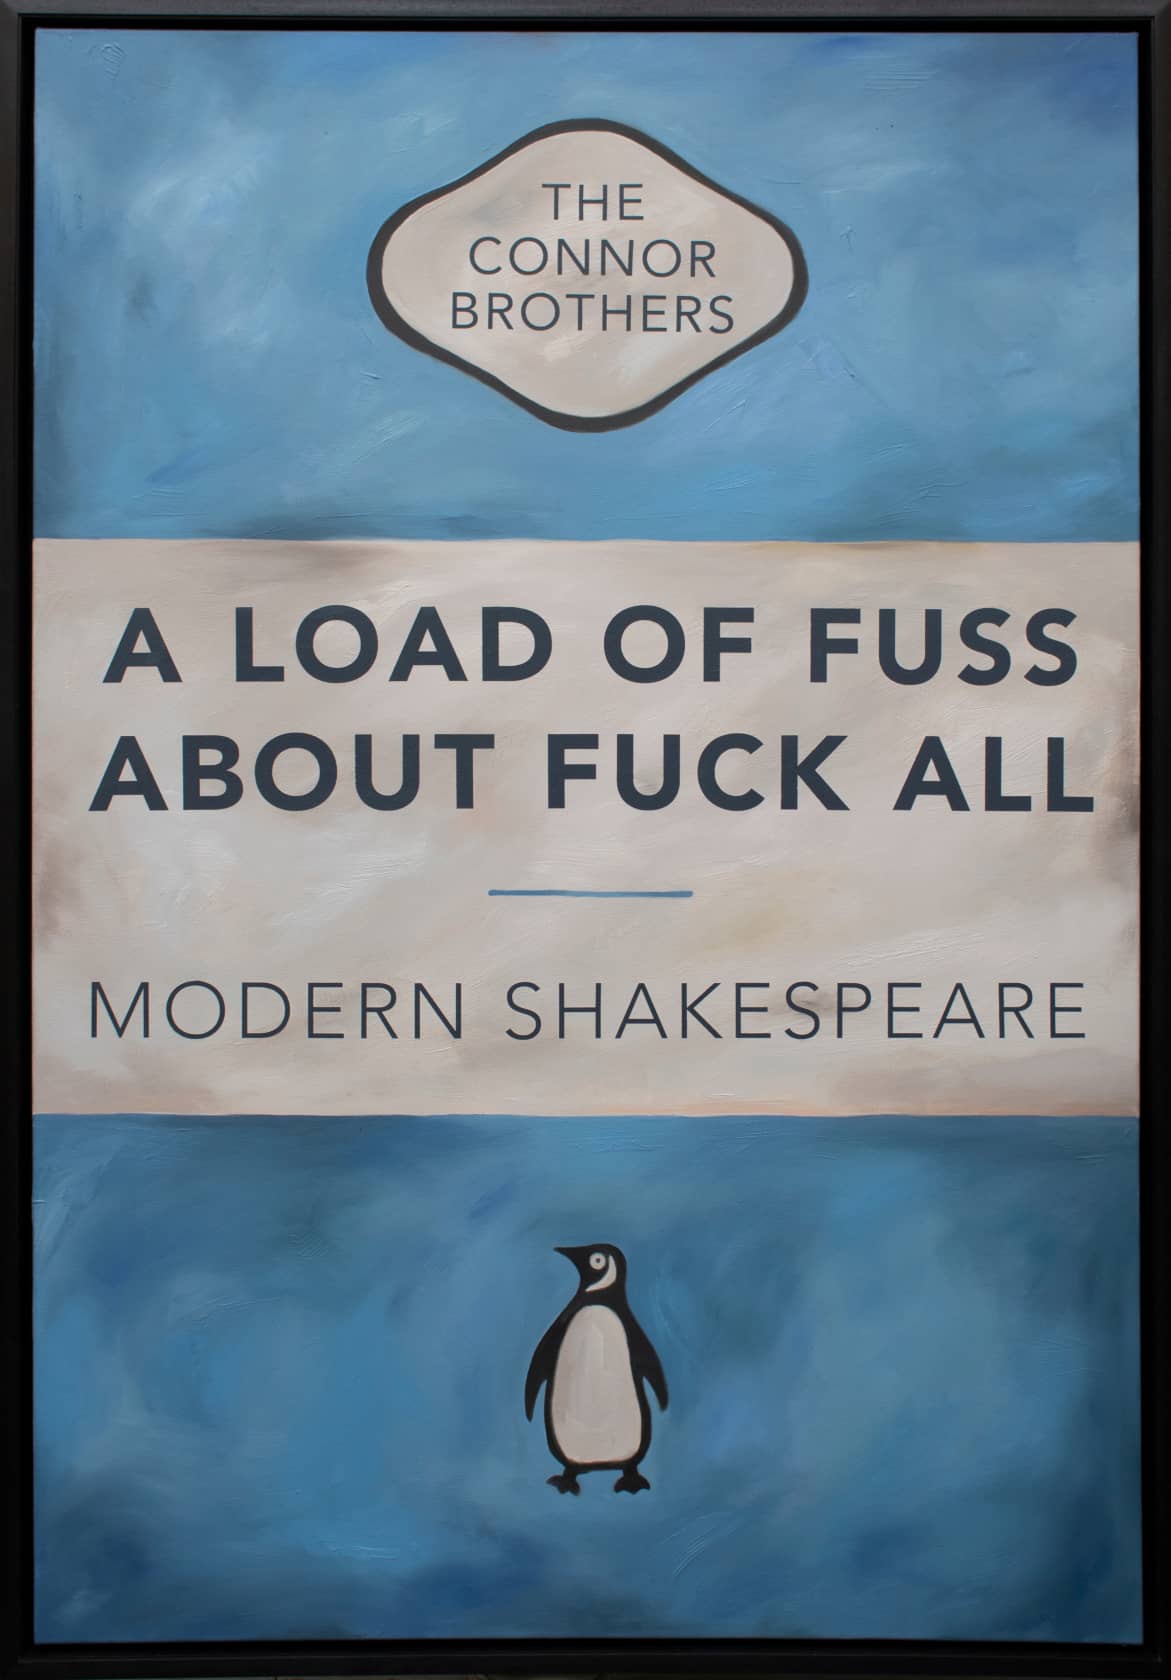 The Connor Brothers, A Load of Fuss, 2019